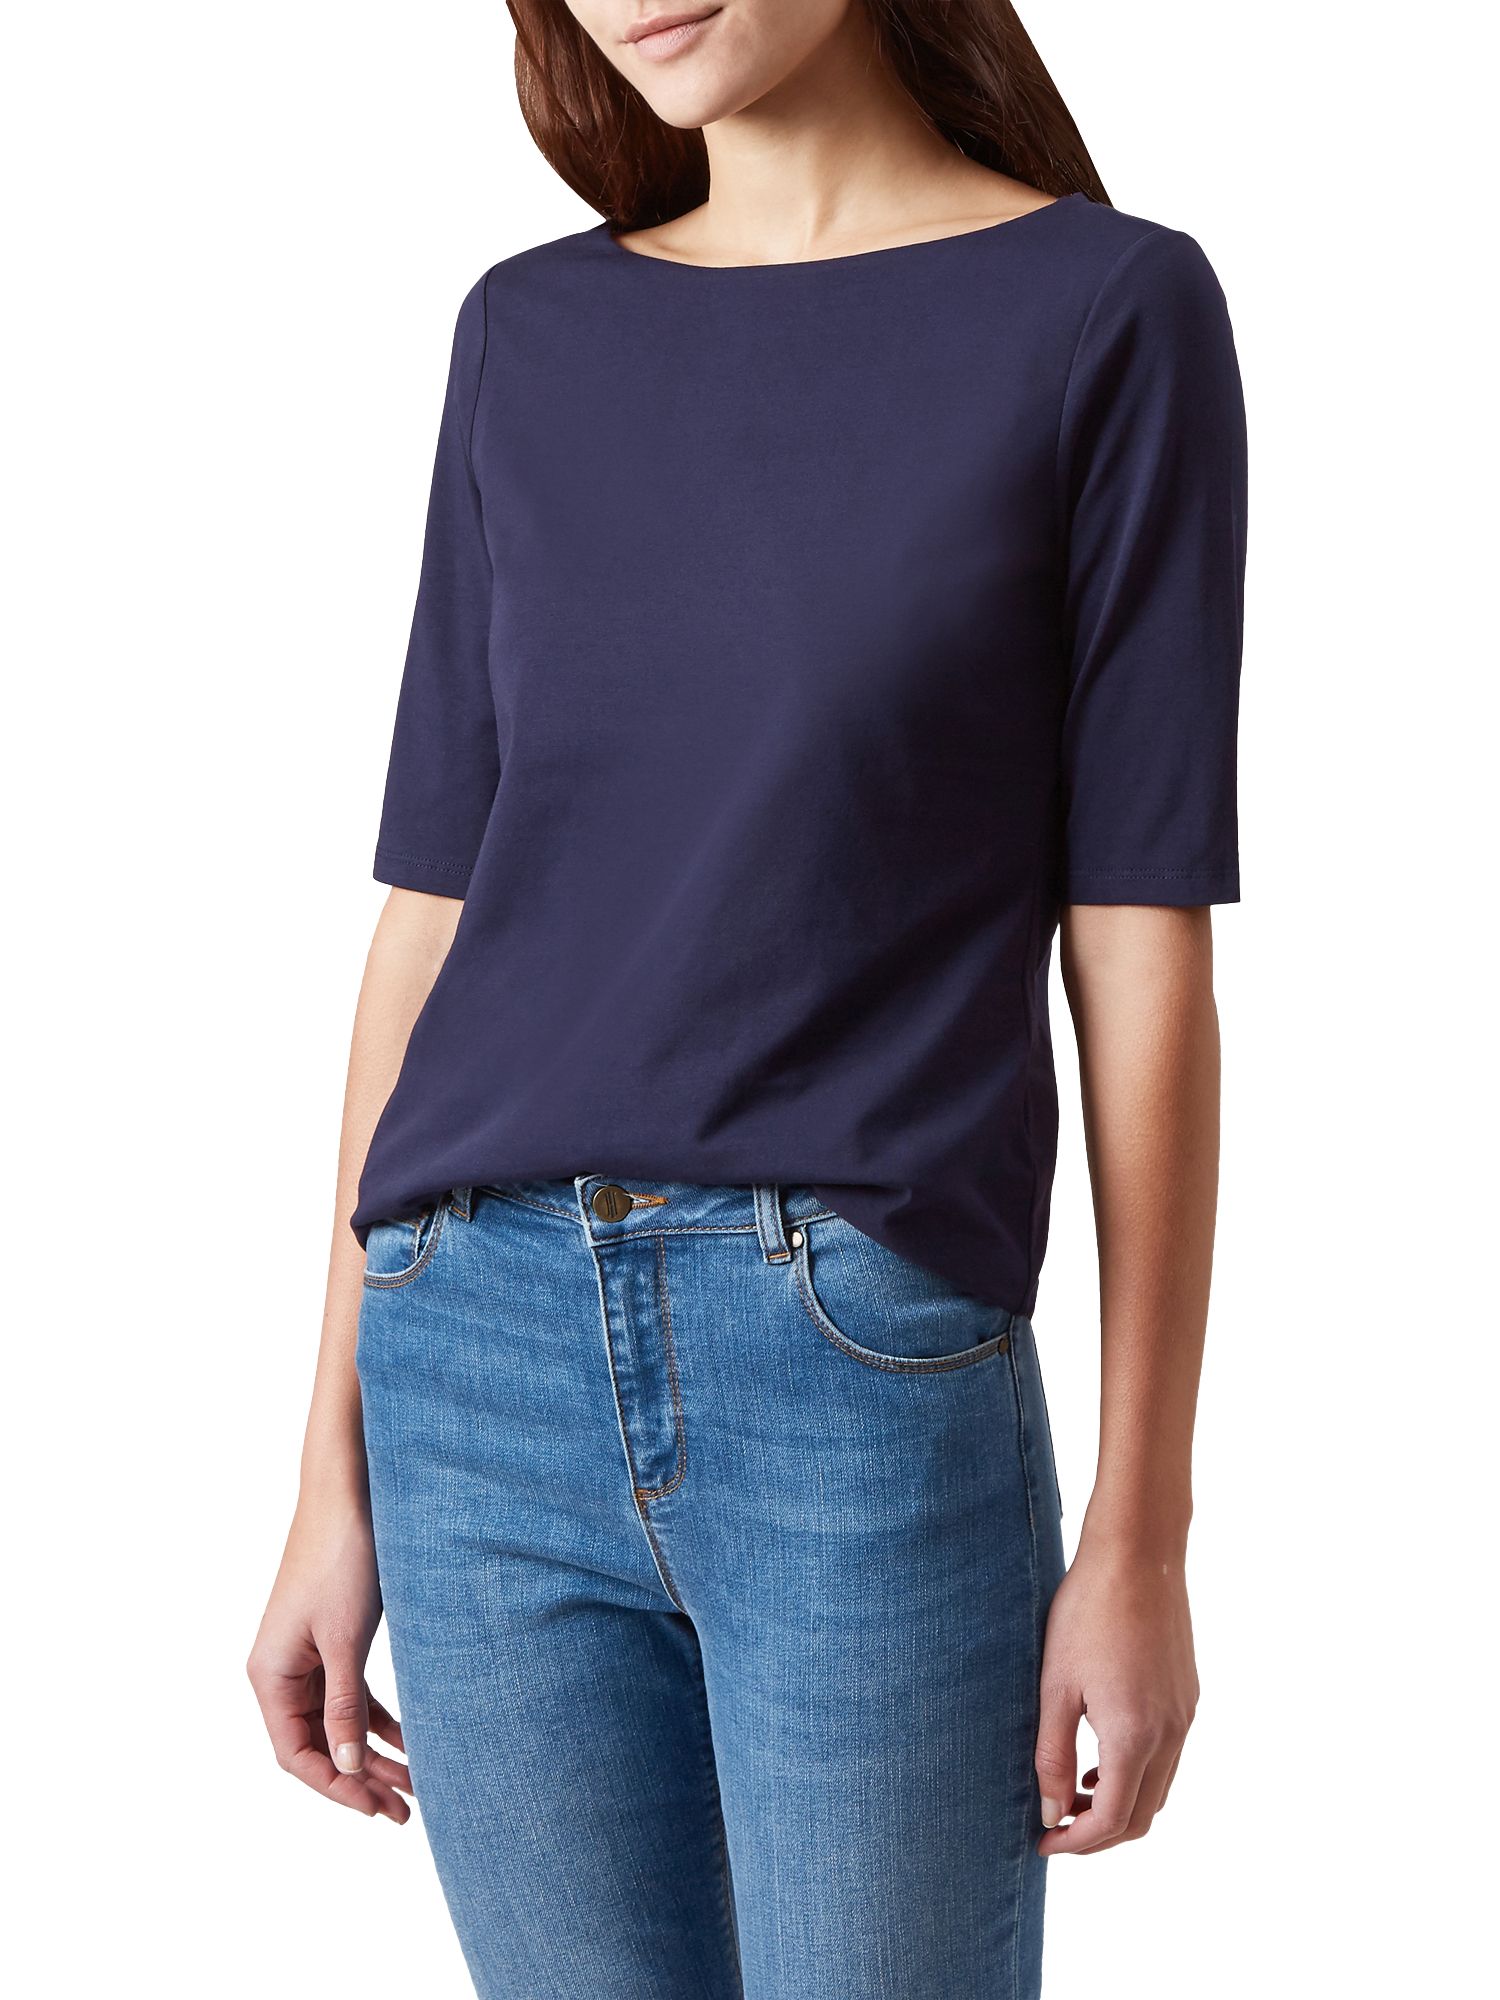 Hobbs Paige Top, French Blue, L